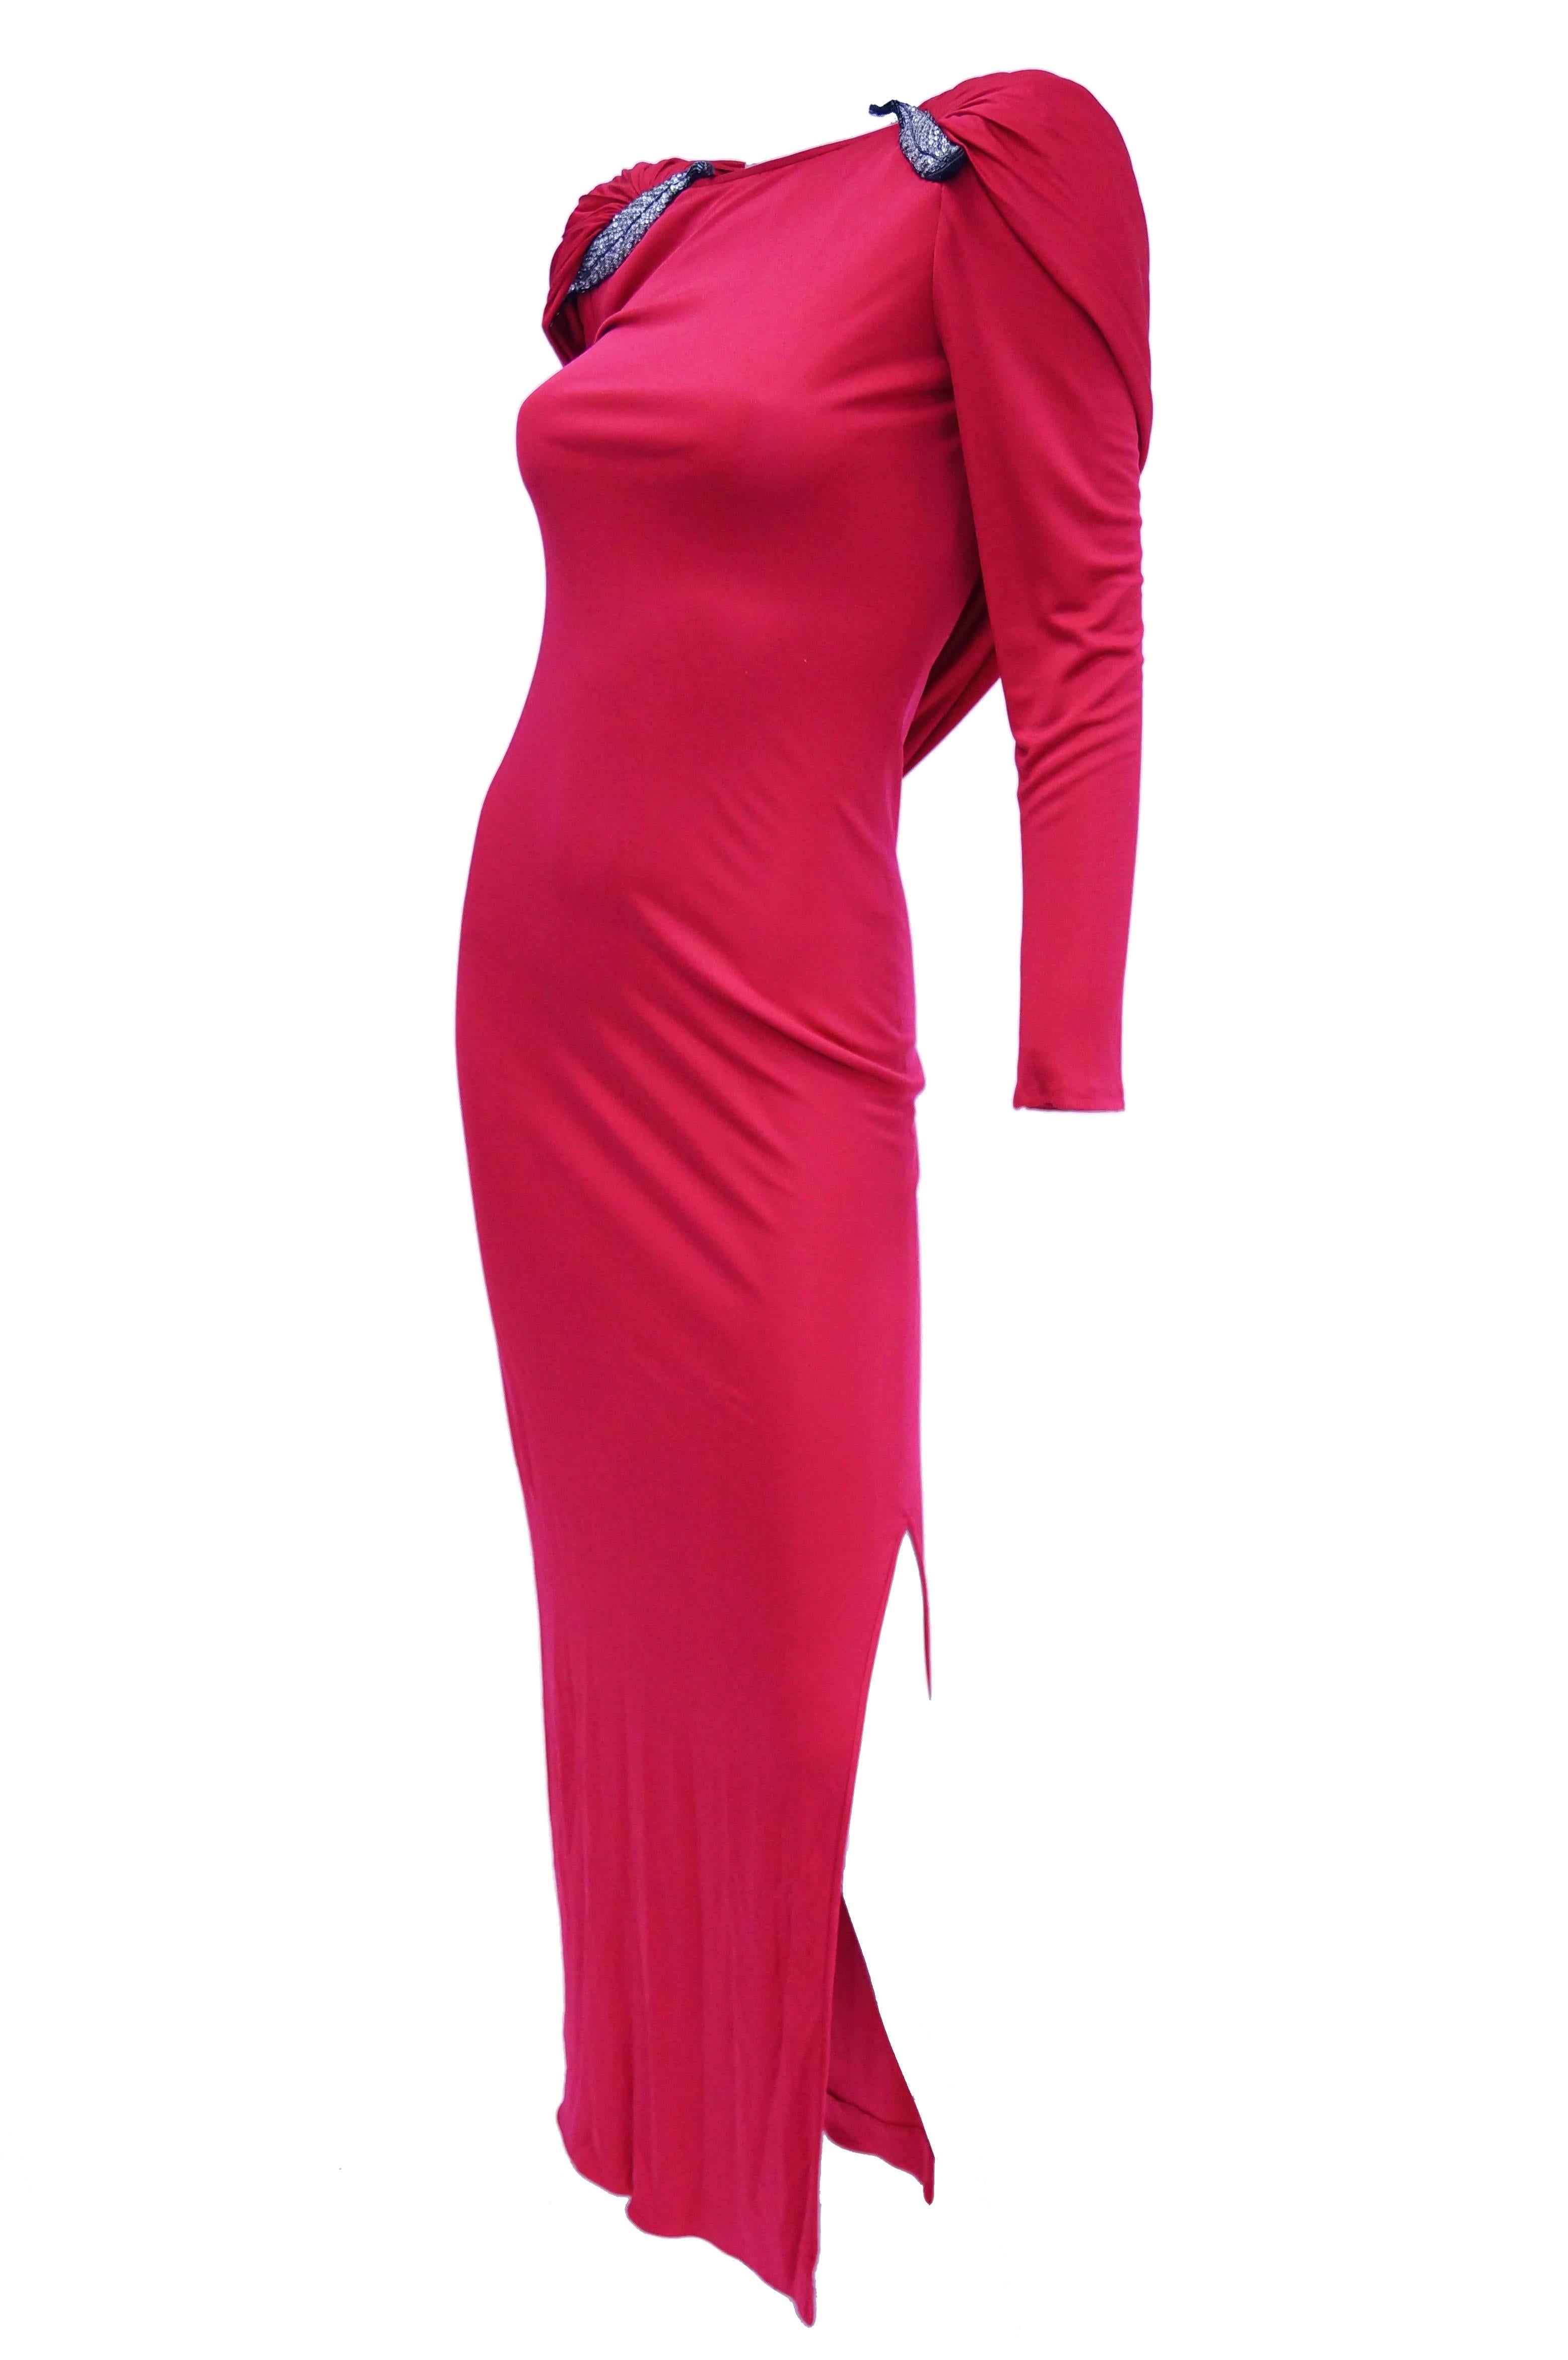 Women's 1984 Valentino Pink Silk Plunge Back Evening Dress w/ Cape and Beading Detail For Sale